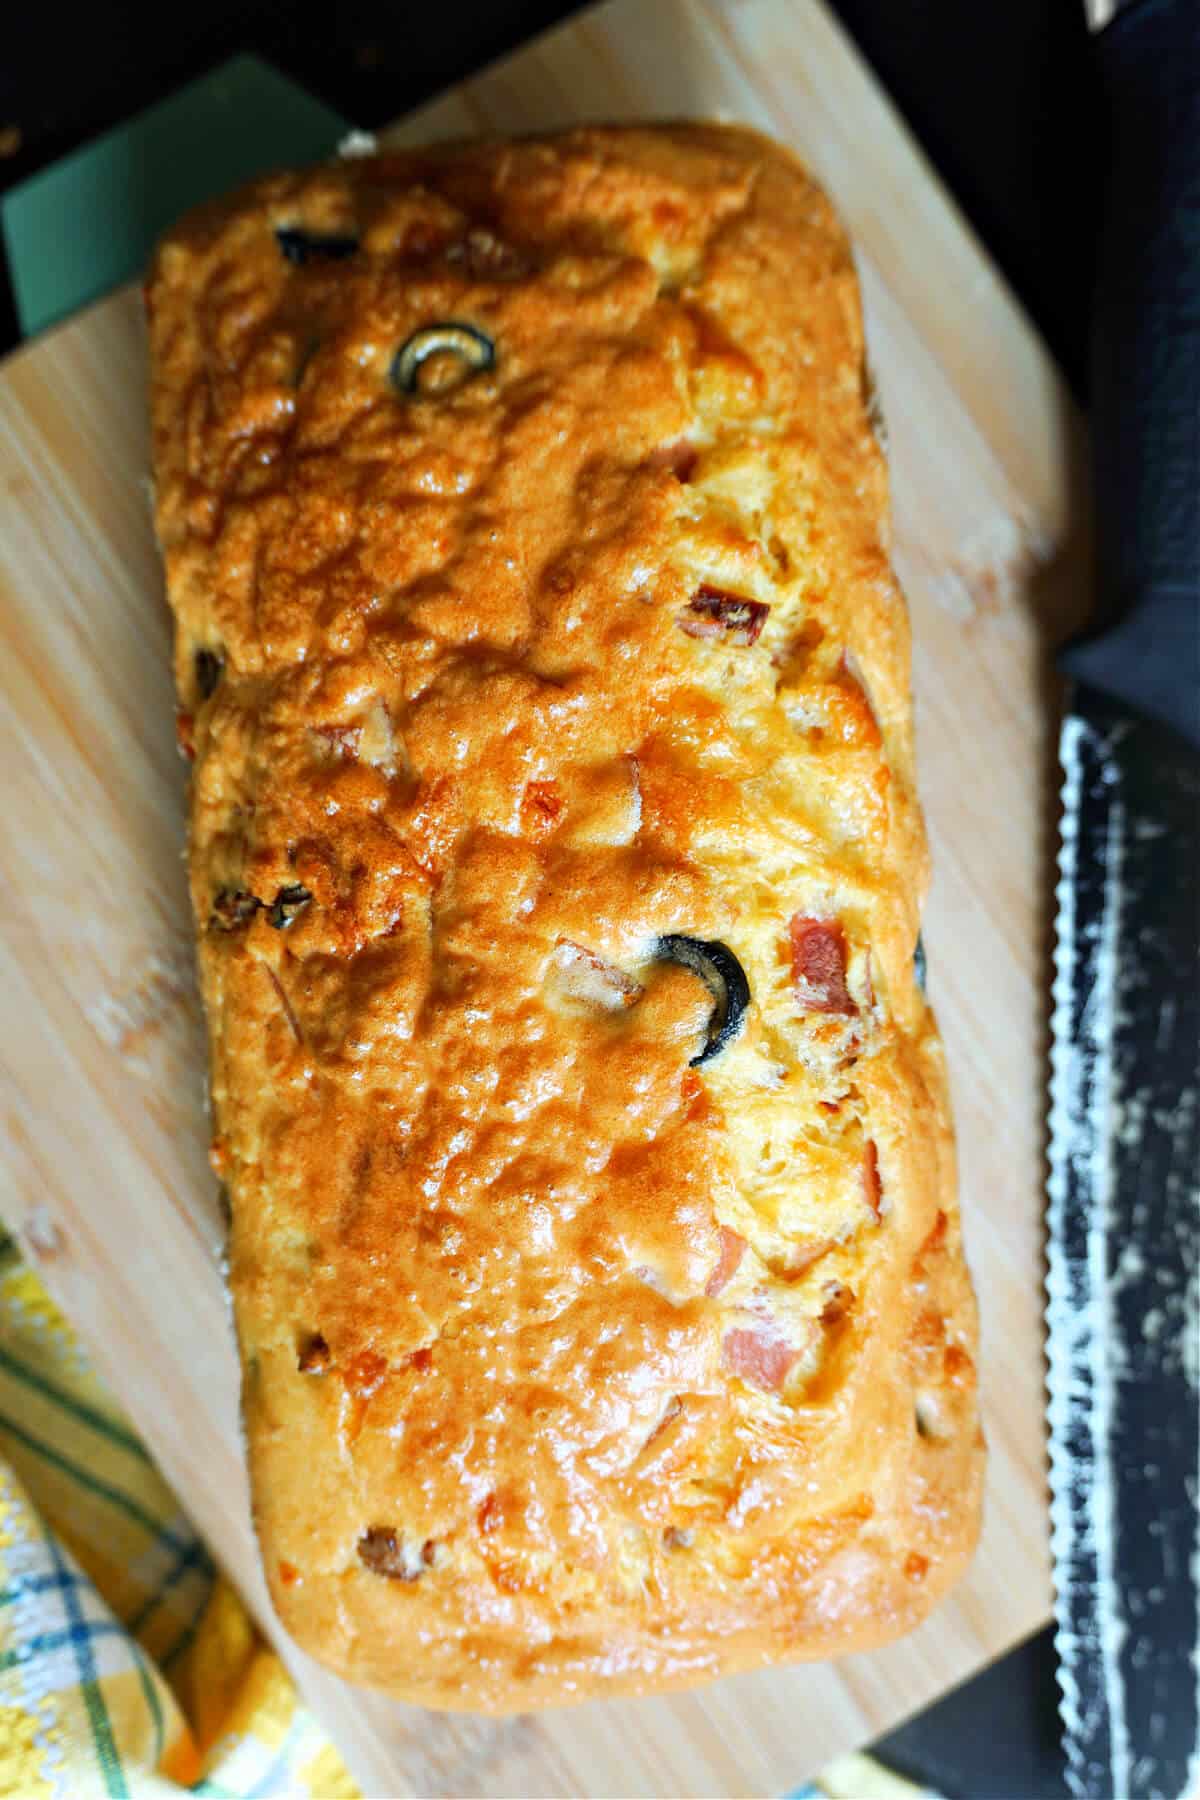 A savoury loaf cake on a wooden board.